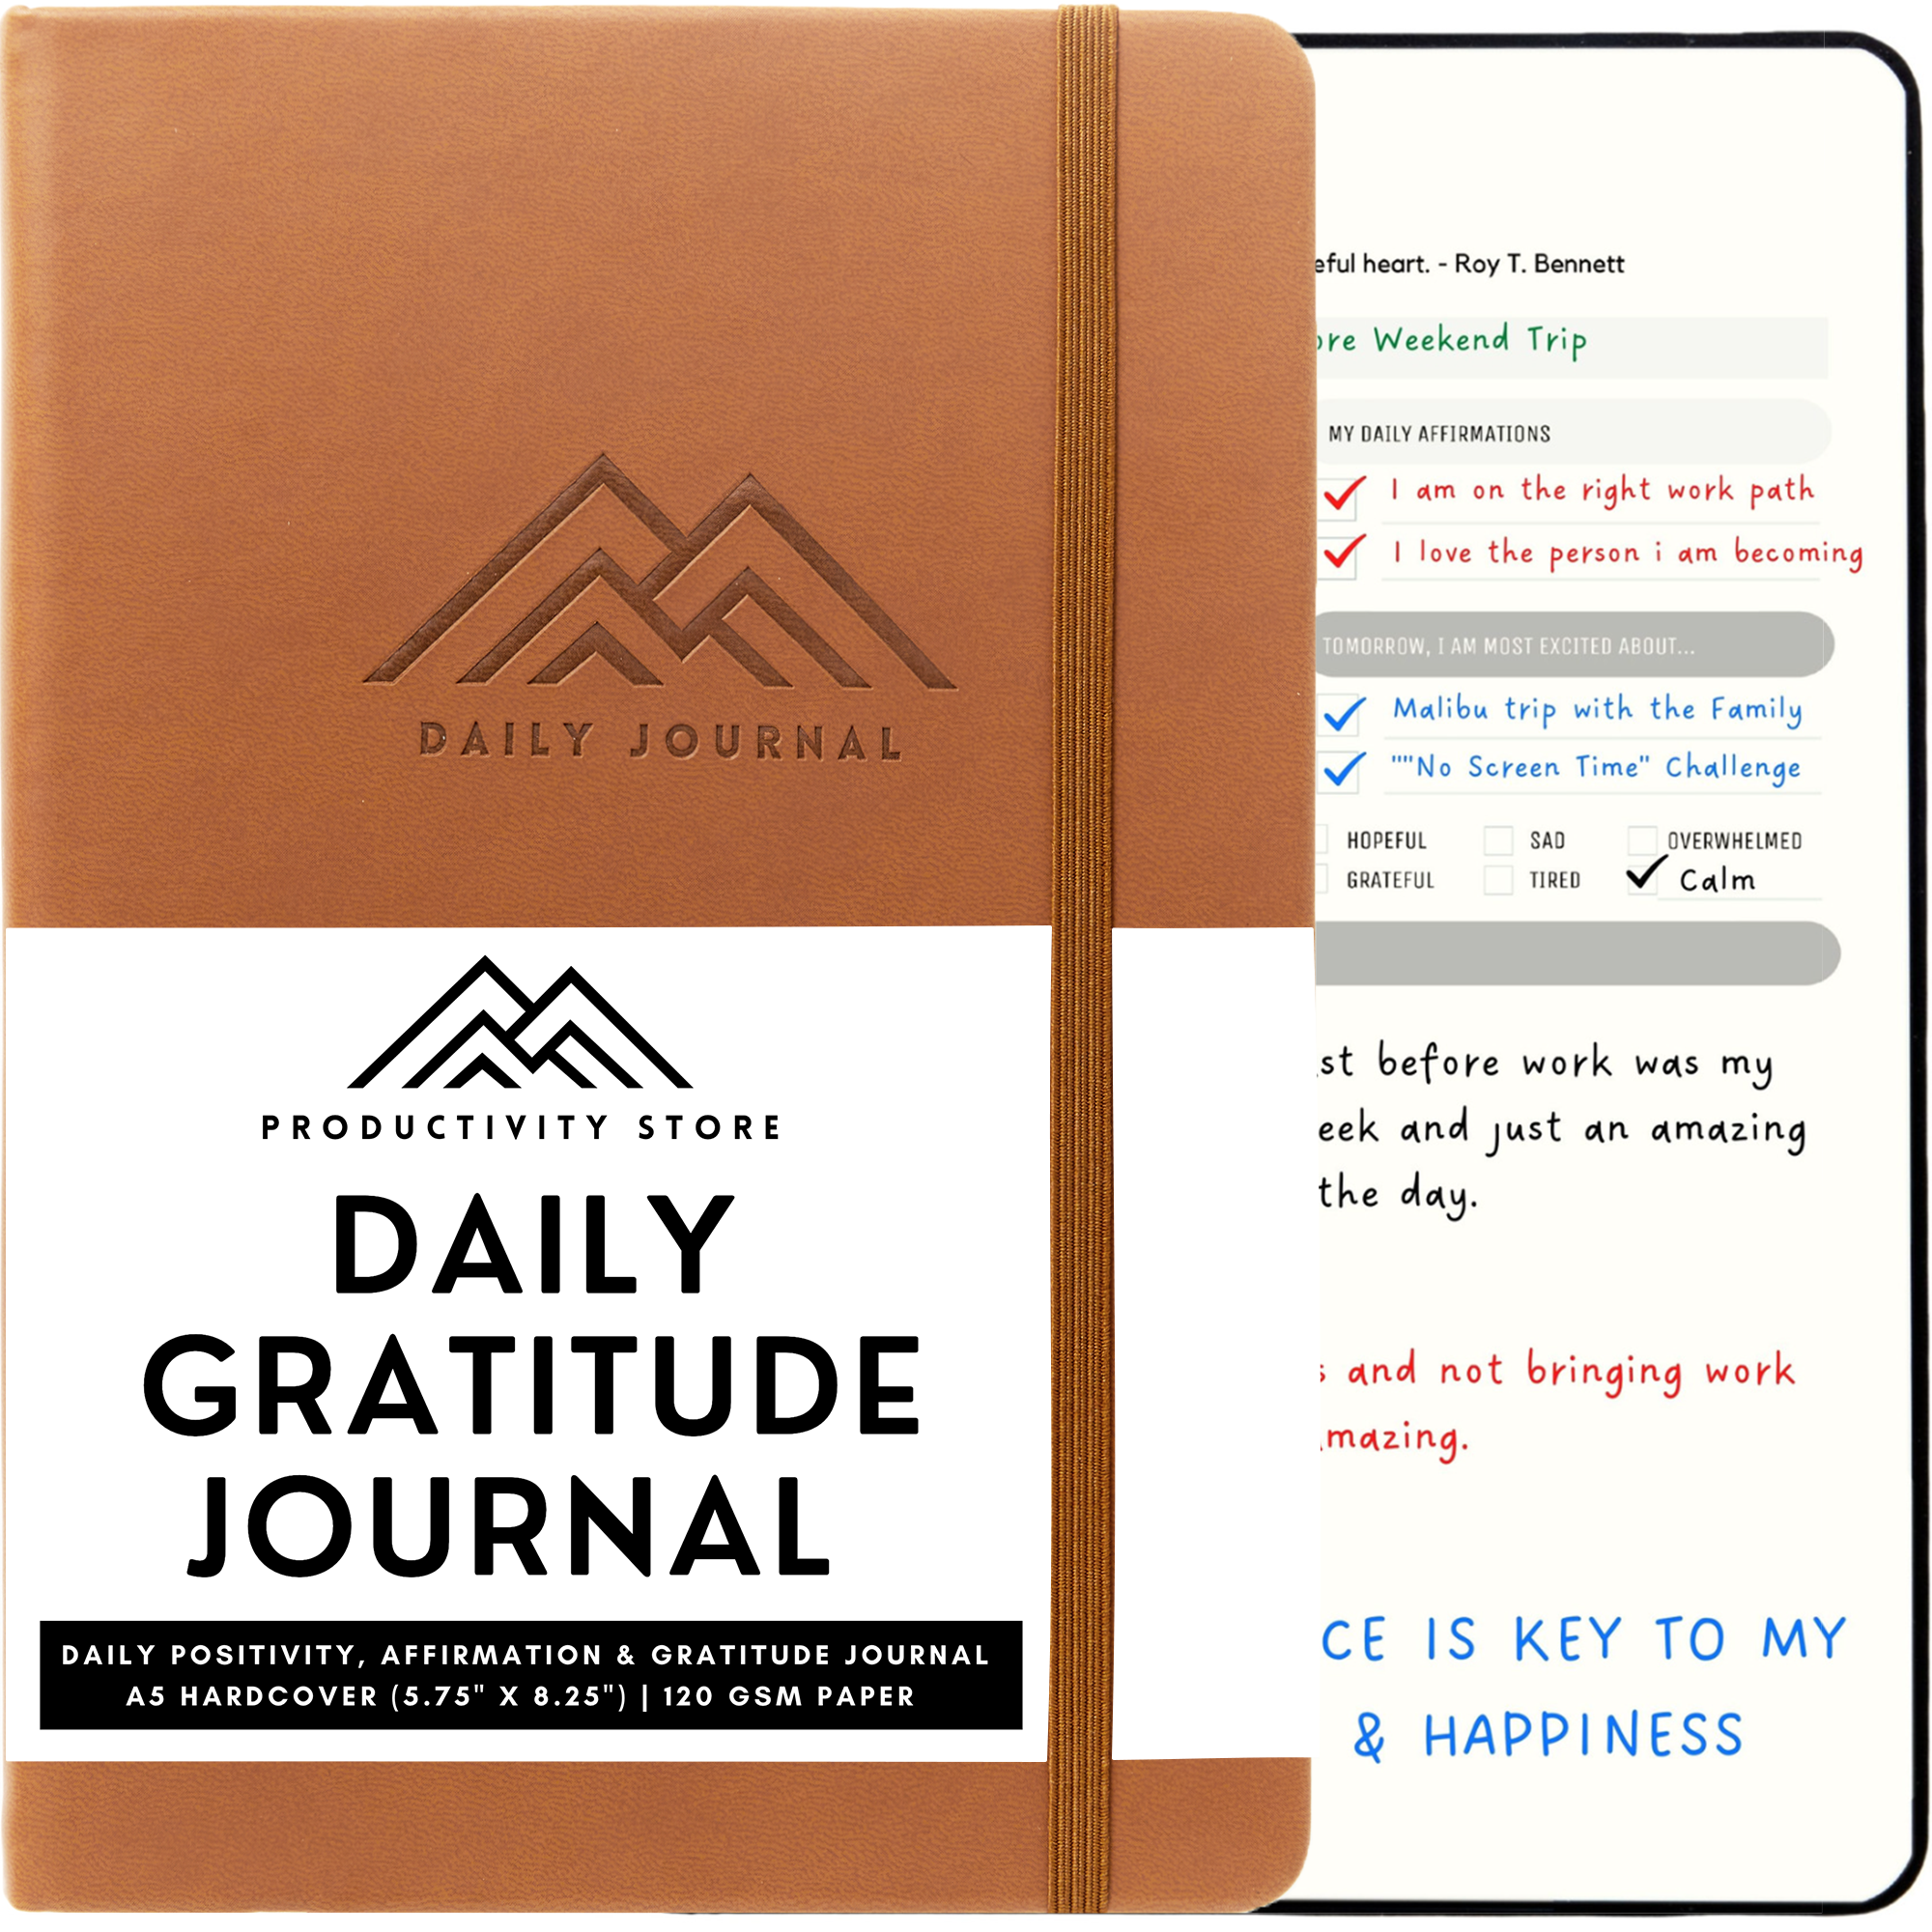 Supercharge Your Career with a Journal: Unlocking the Power of Personal Reflection